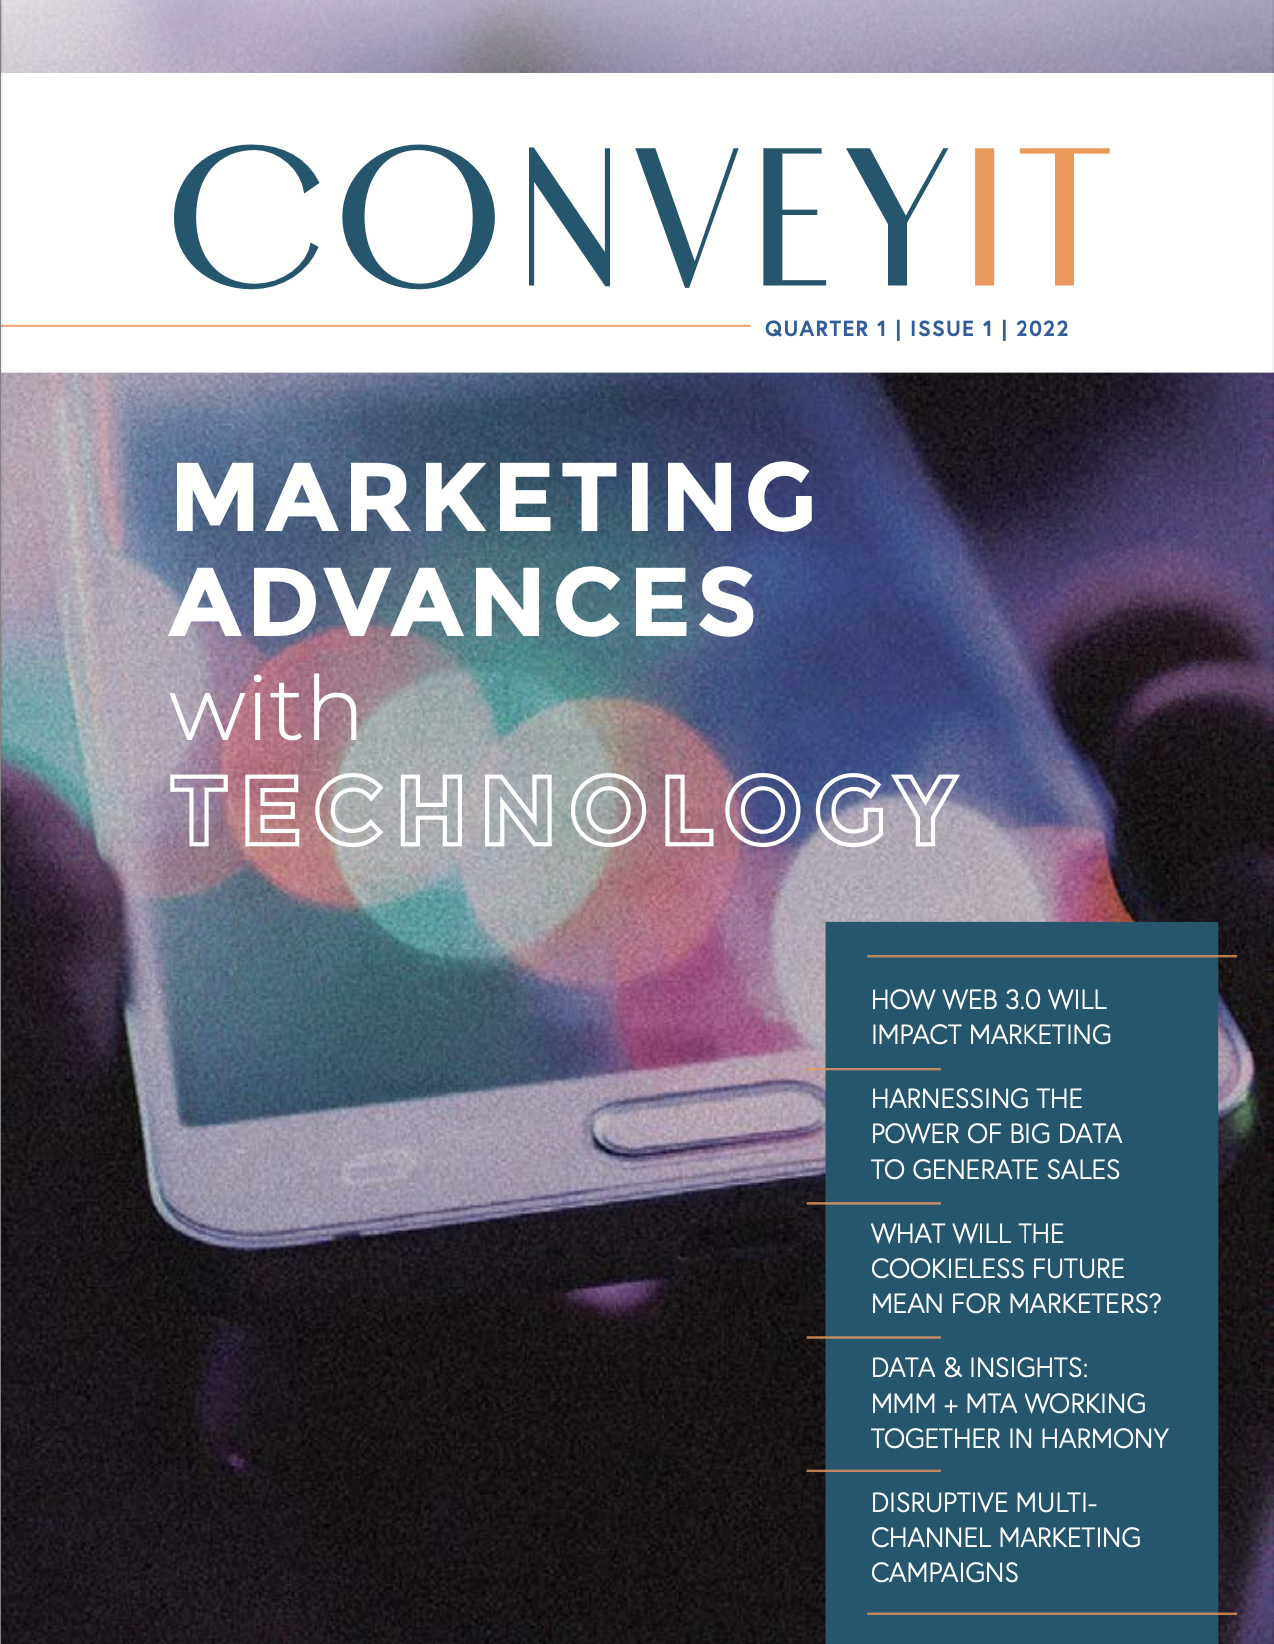 Convey It - Marketing Advances with Technology